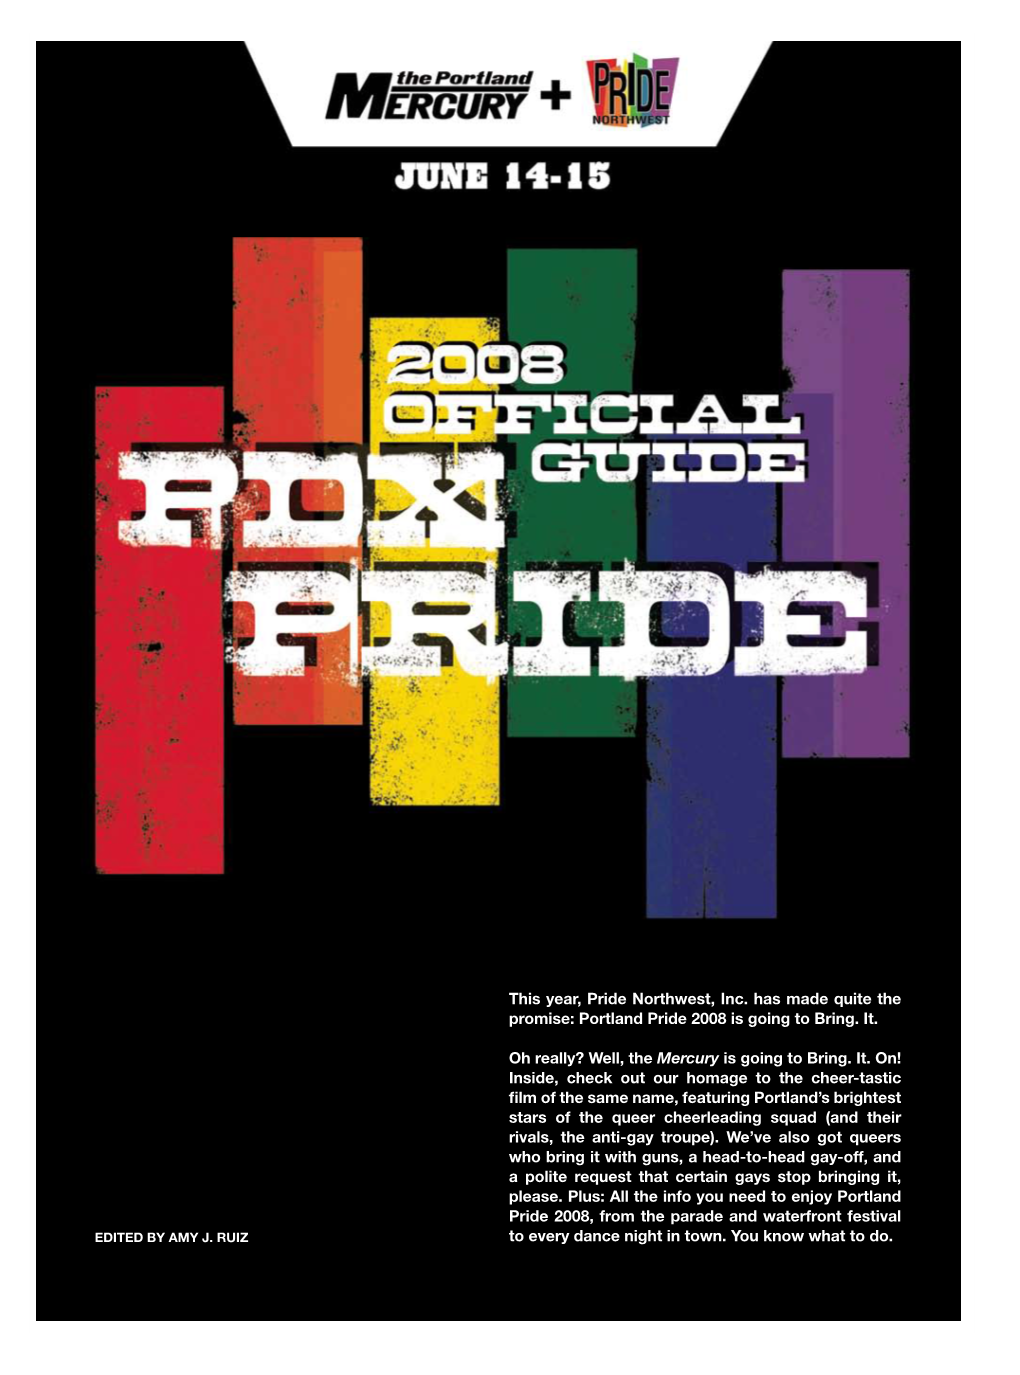 Portland Pride 2008 Is Going to Bring. It. Oh Really?